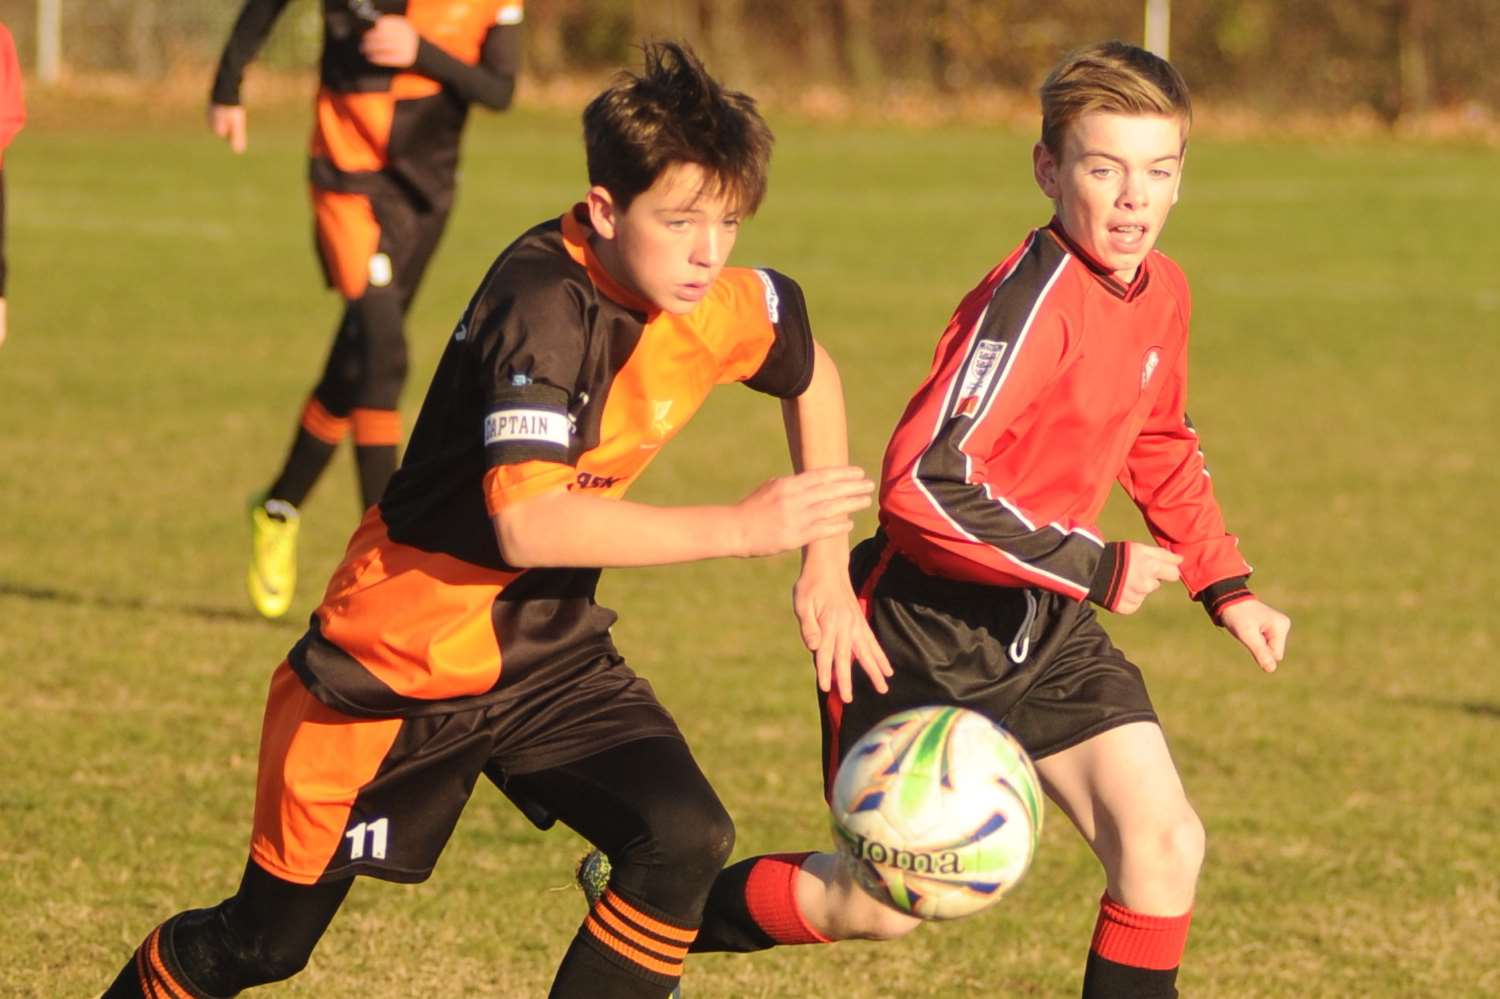 Pegasus 81 and Rainham Kenilworth Colts fight it out for the points in Under-13 Division 1 Picture: Steve Crispe